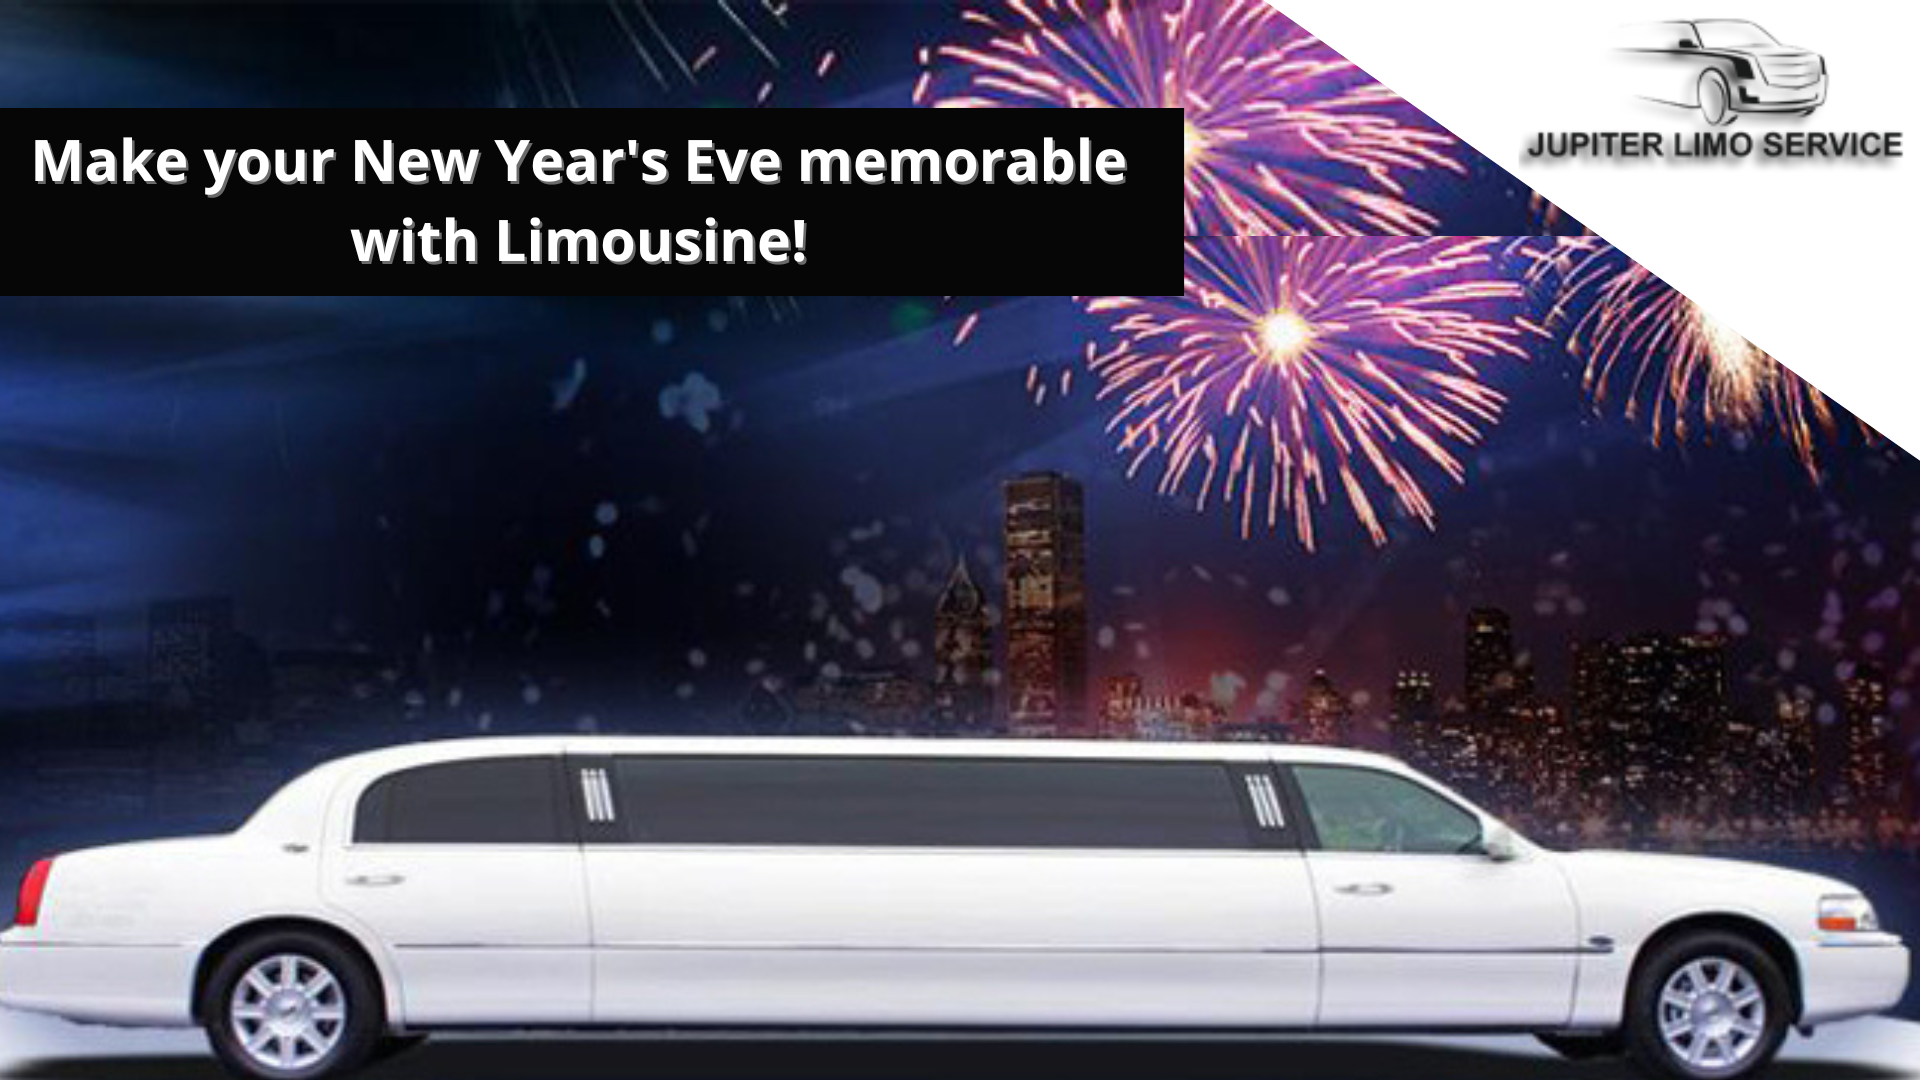 Make your New Year’s Eve memorable with Limousine!